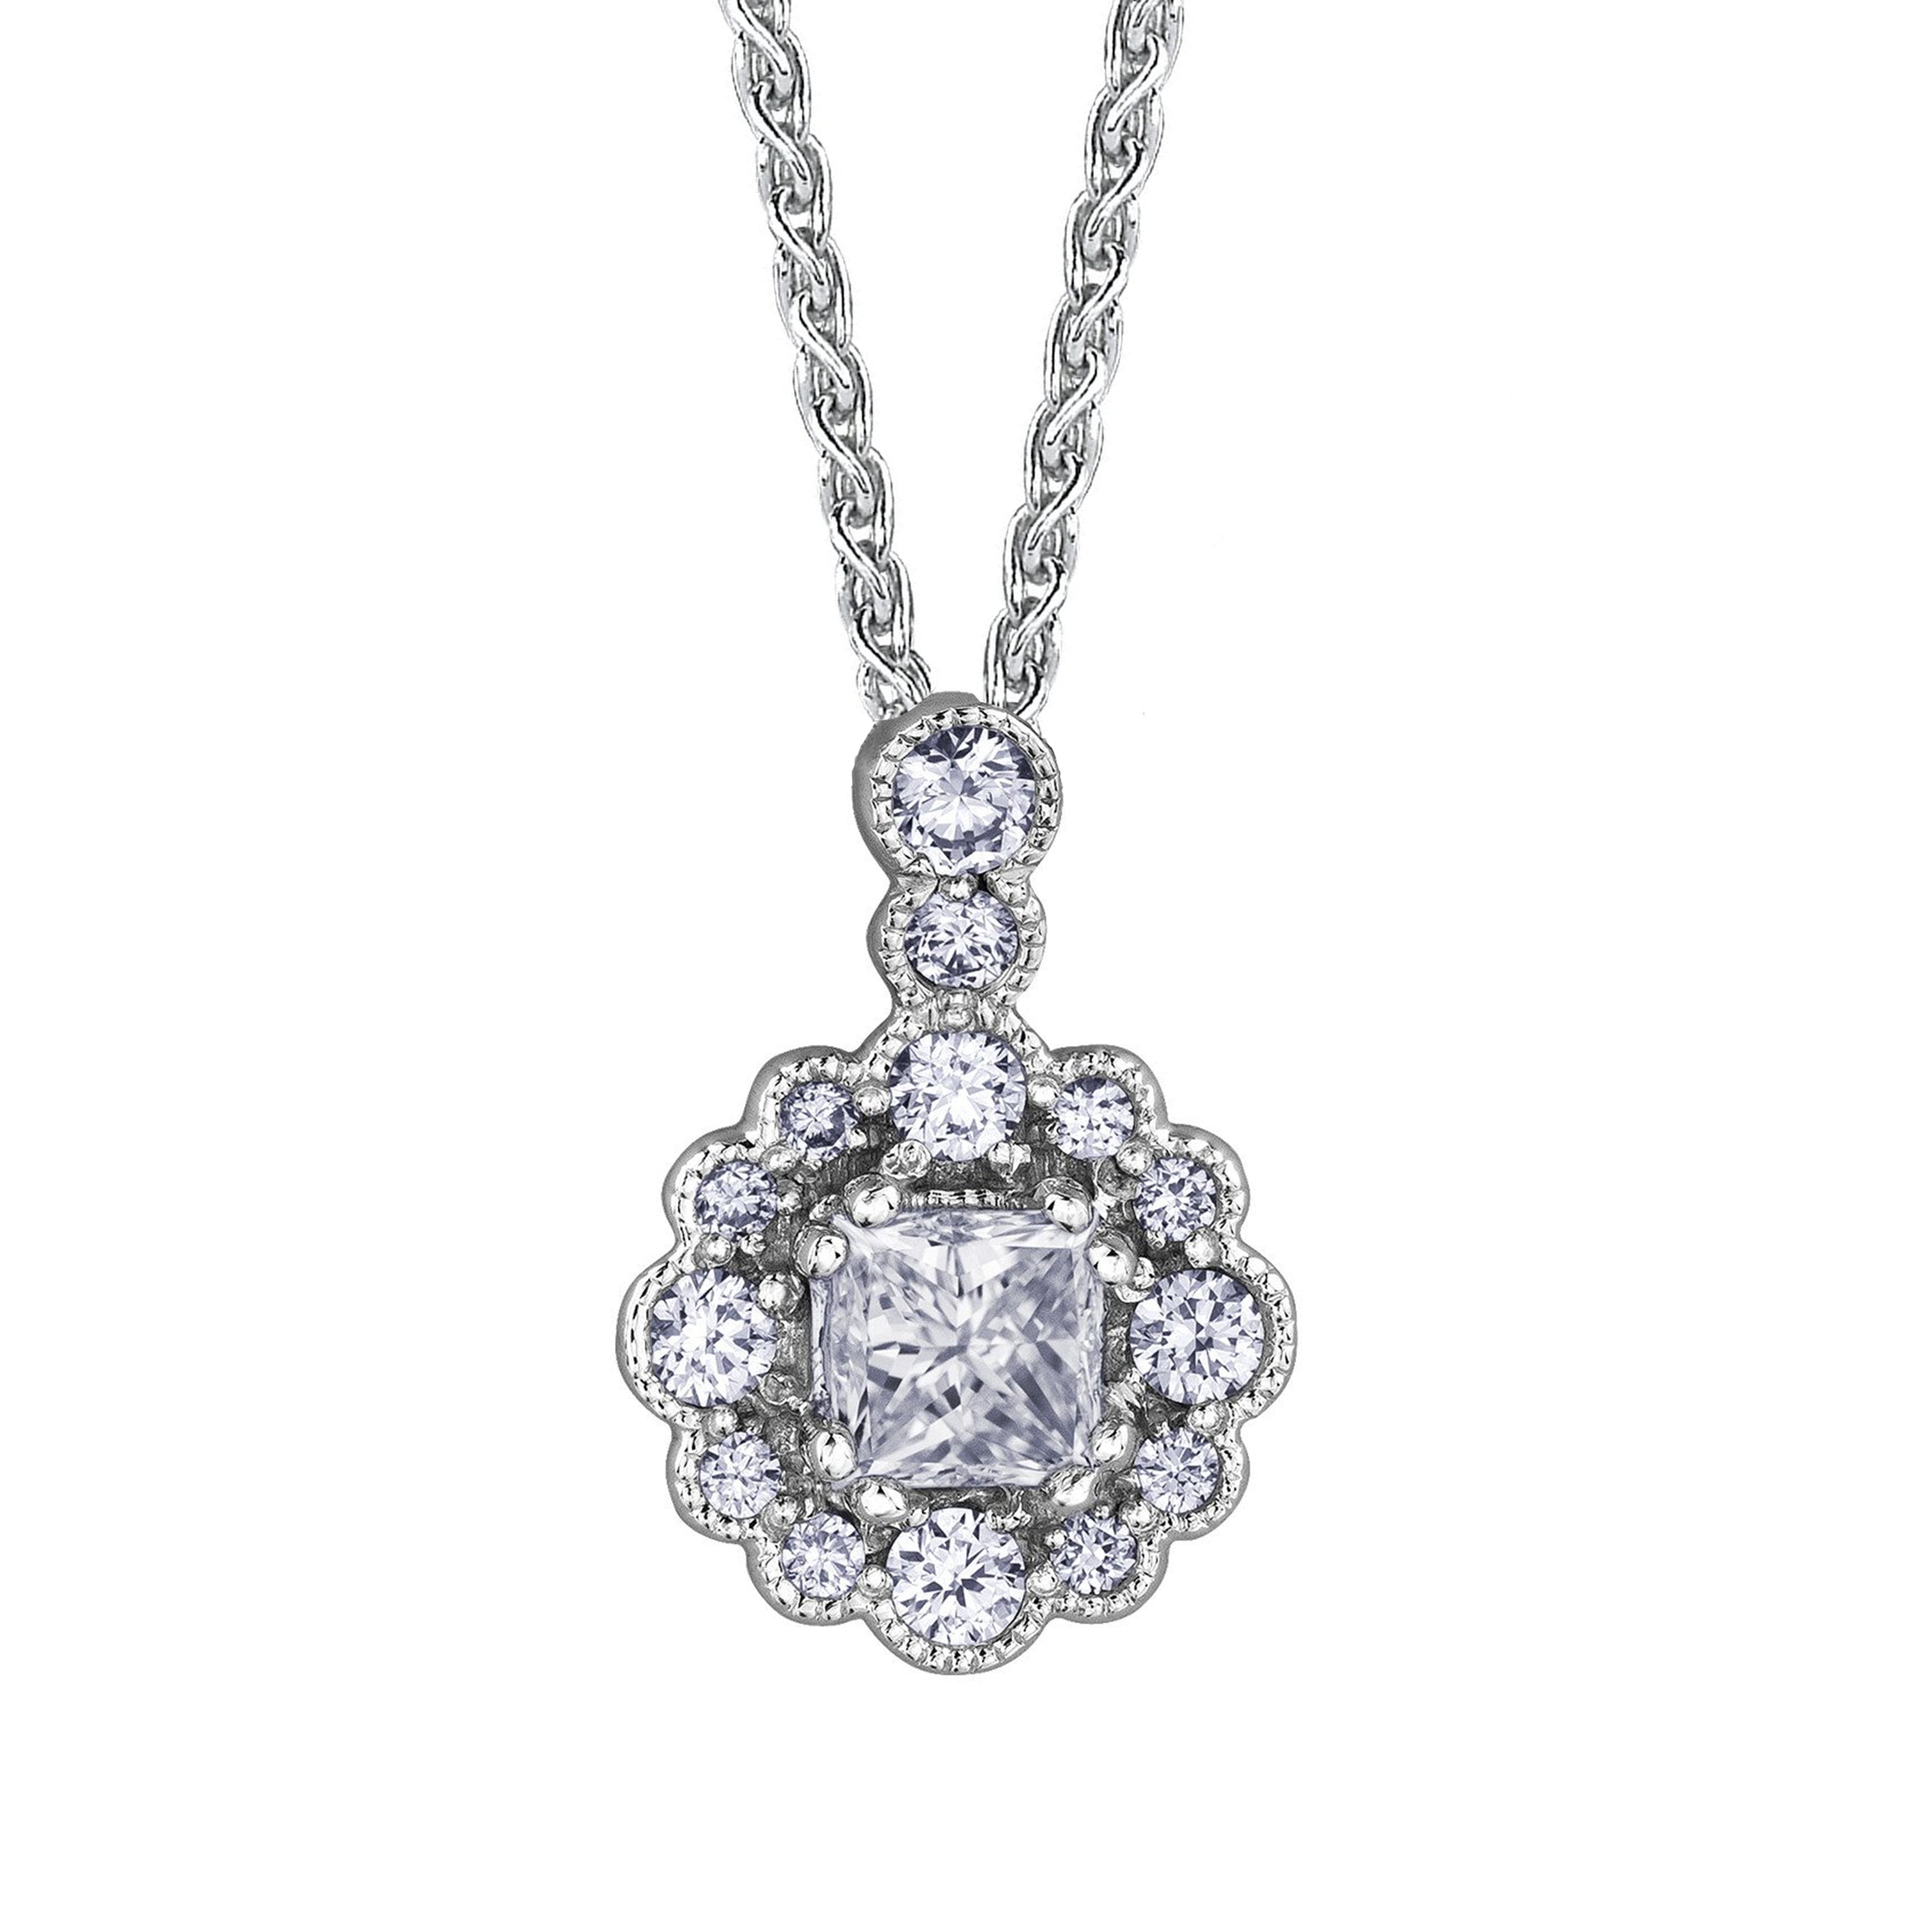 Crafted in 14KT white Certified Canadian Gold, this pendant features a diamond-set snowflake halo with a princess-cut Canadian centre diamond and a diamond-set bail. 